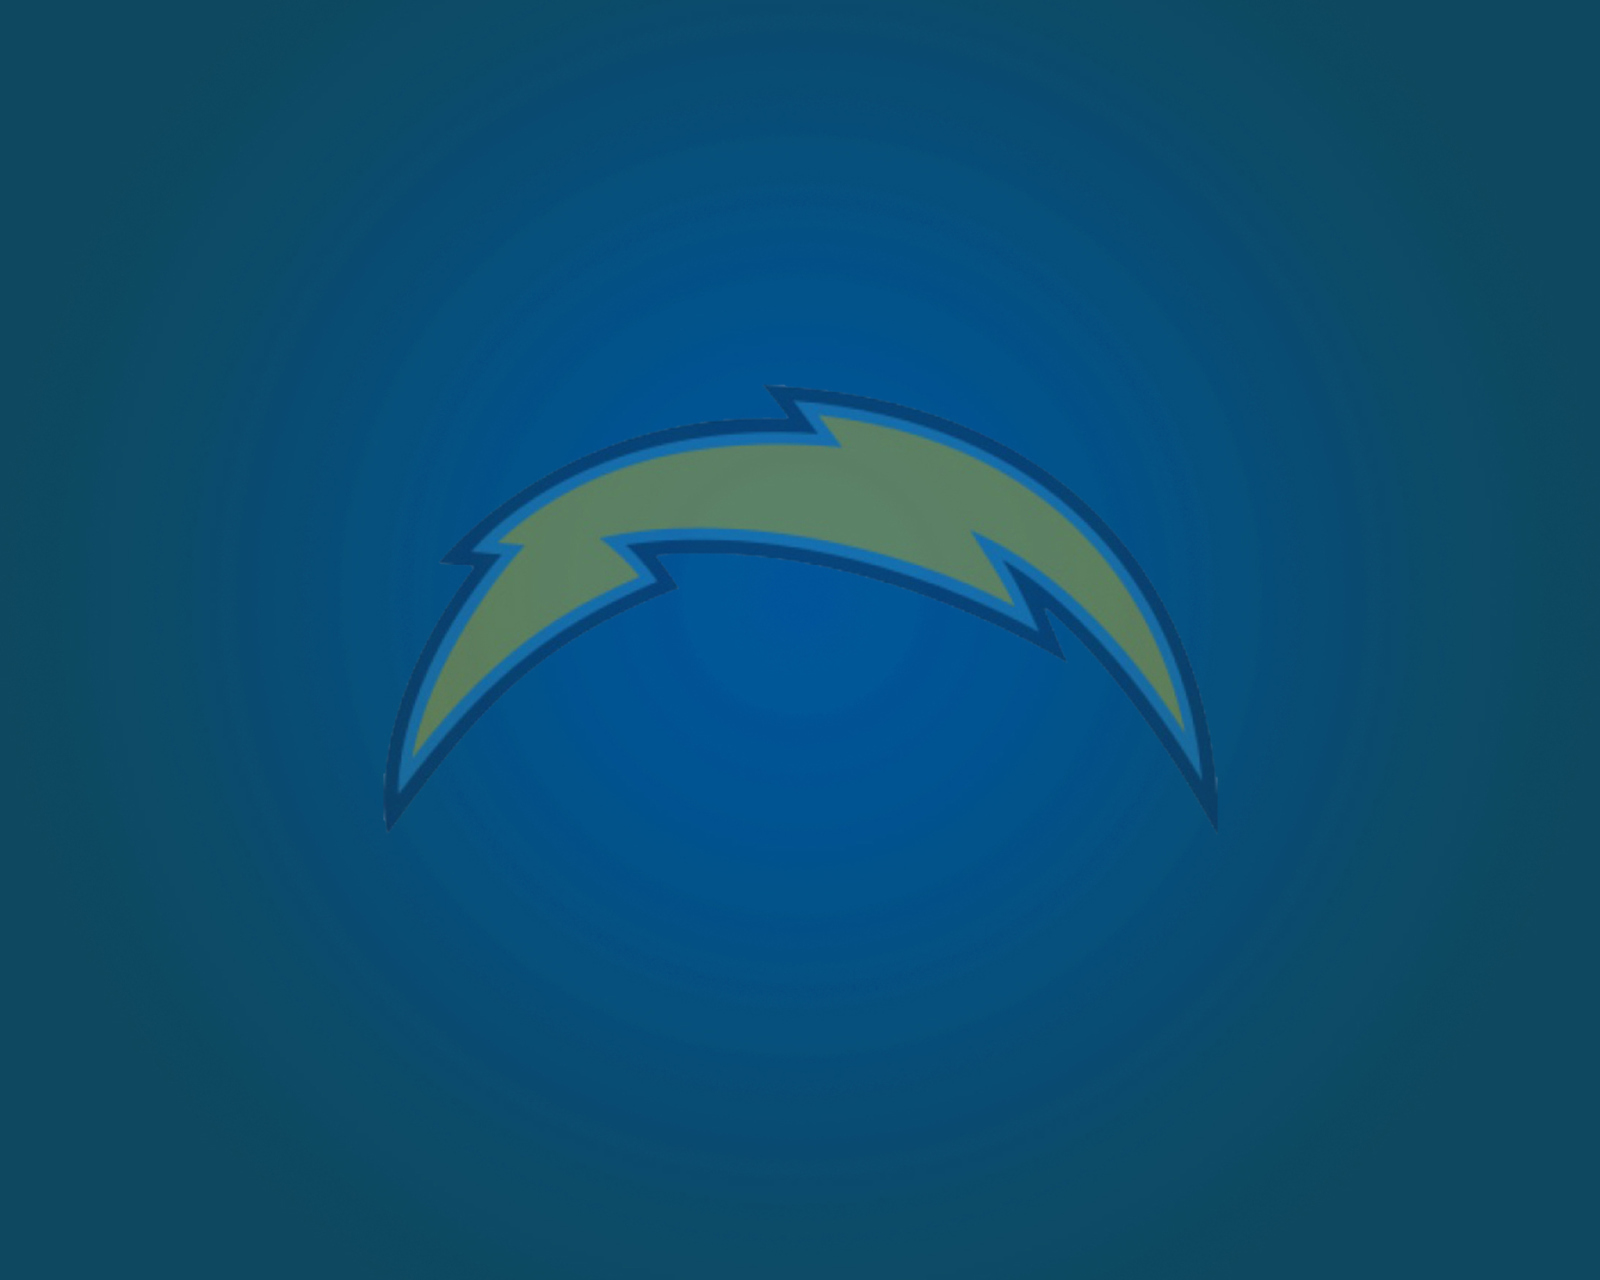 San Diego Chargers wallpaper 1600x1280